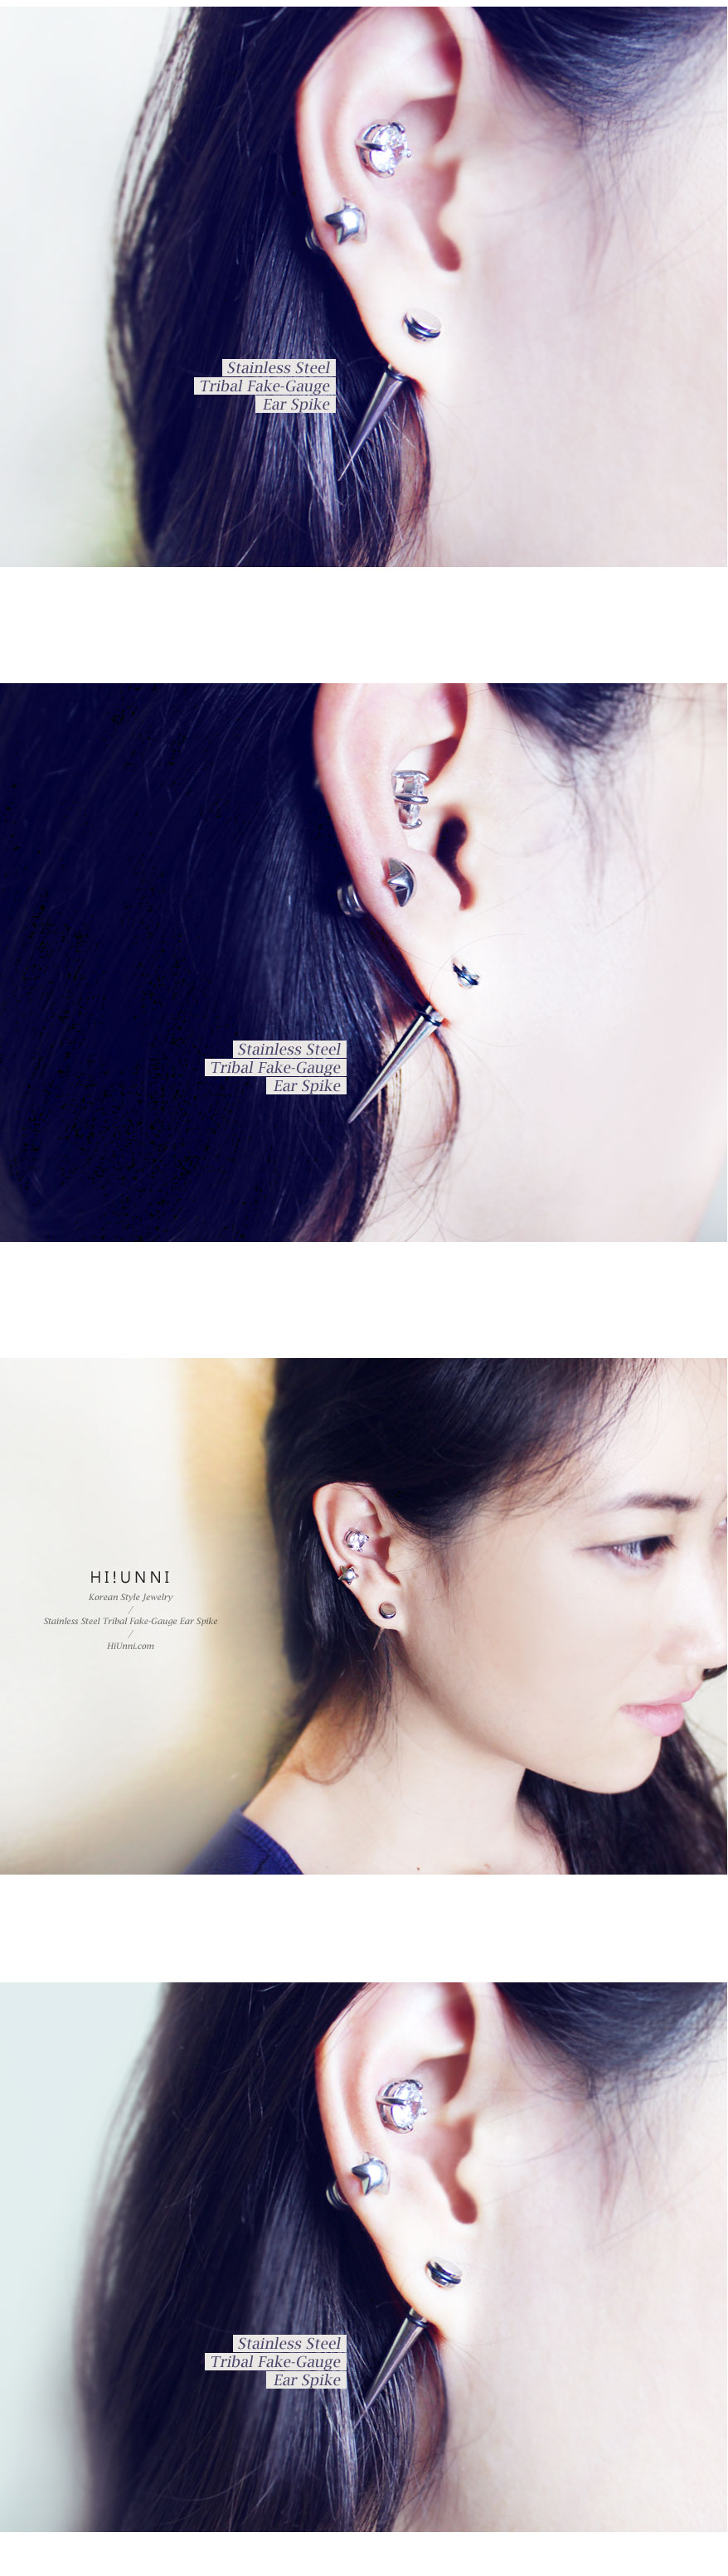 ear_studs_piercing_Cartilage_earrings_16g_316l_Surgical_Stainless_Steel_korean_asian_style_jewelry_fake_Gauge_taper_5